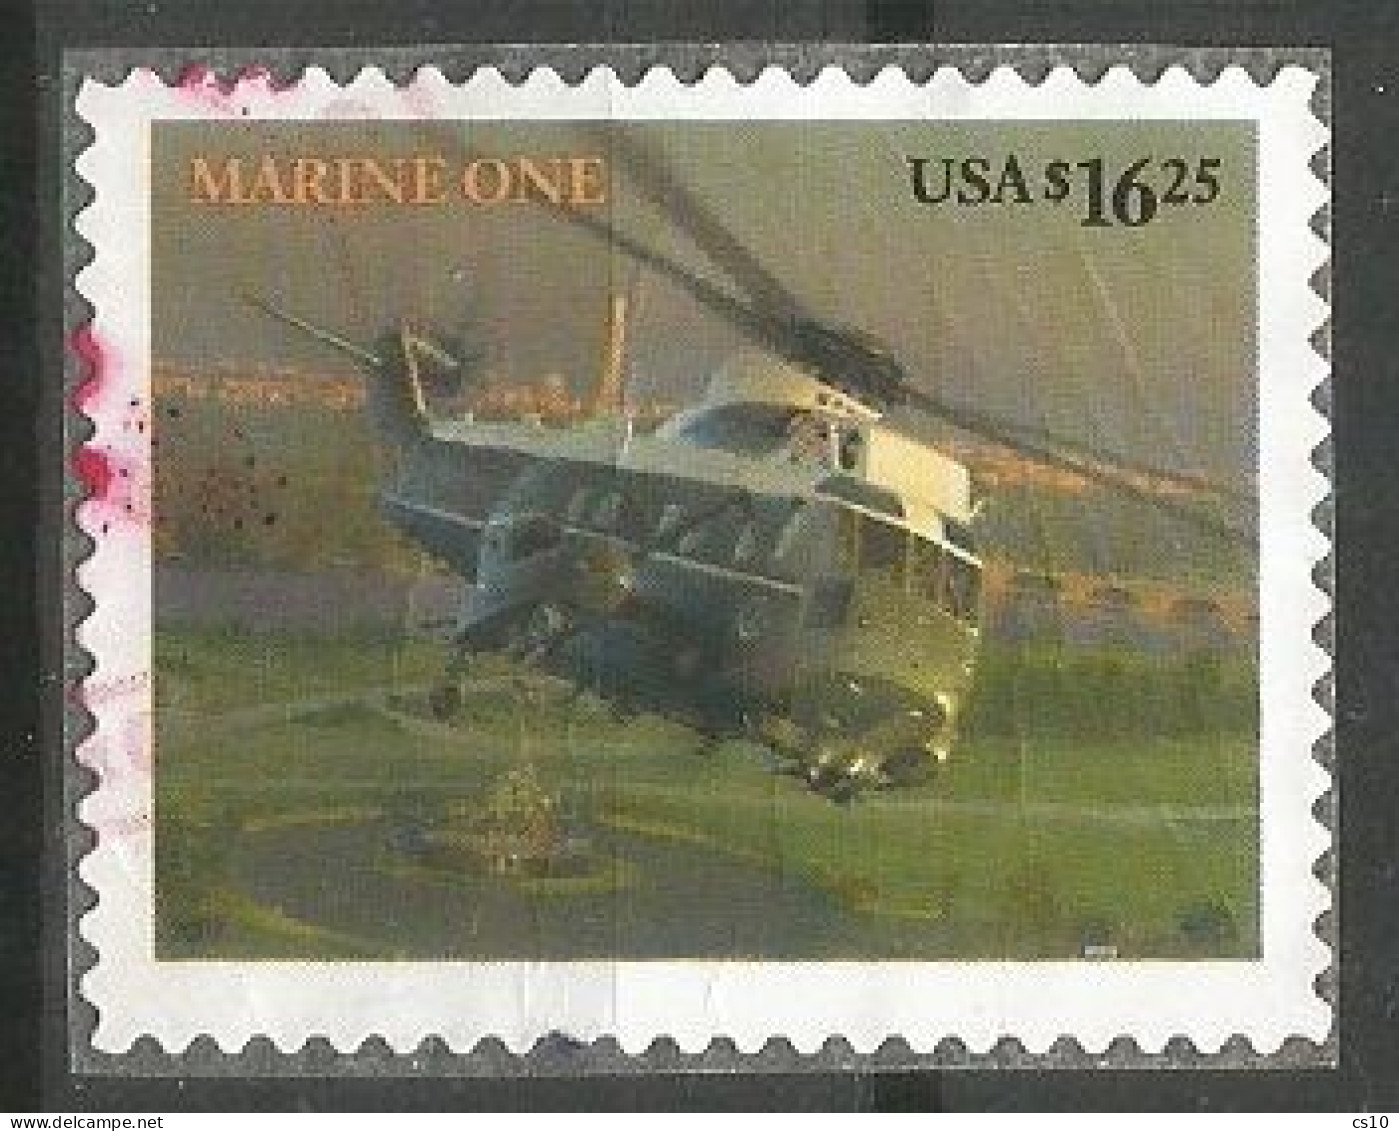 USA 2007 HV Express Mail $ 17.95 President Helicopter Marine One SC. # 4145 In VFU Condition - Verzamelingen